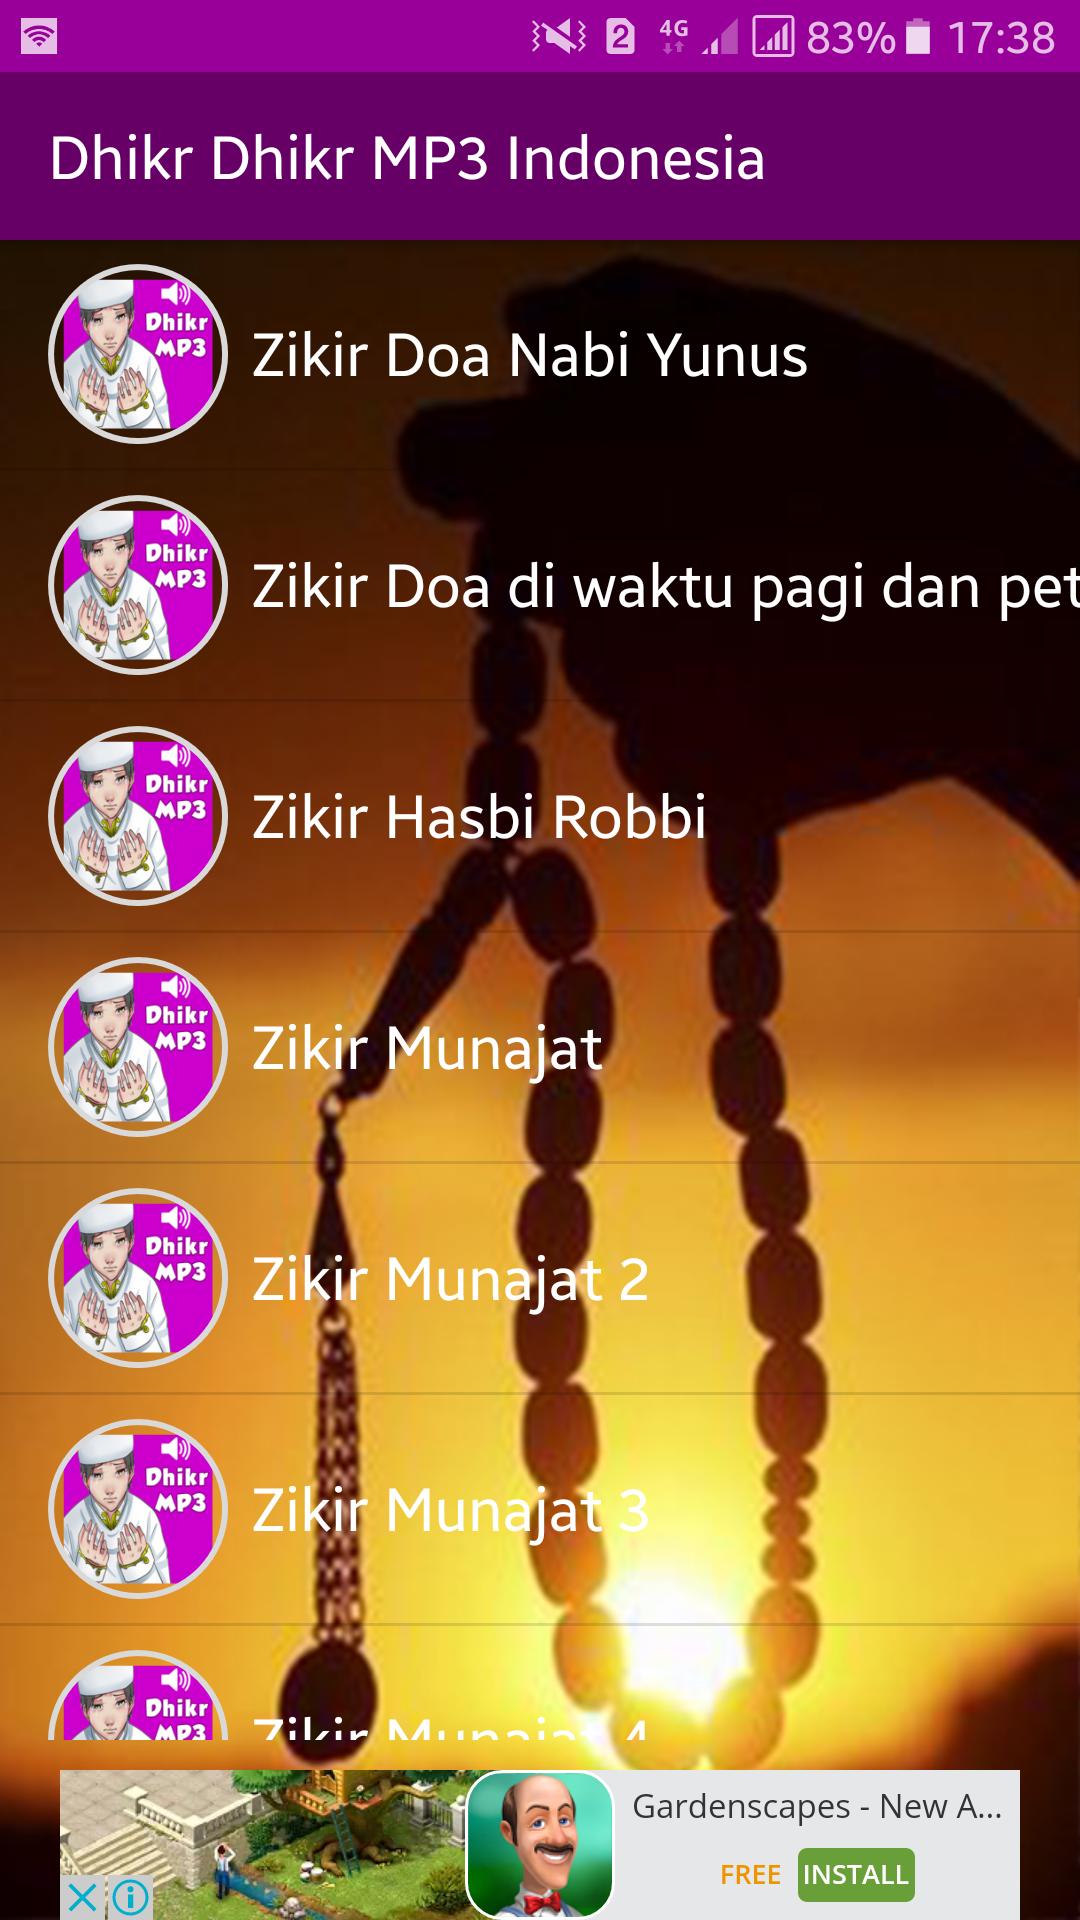 Dhikr Dhikr MP3 Indonesia for Android - APK Download